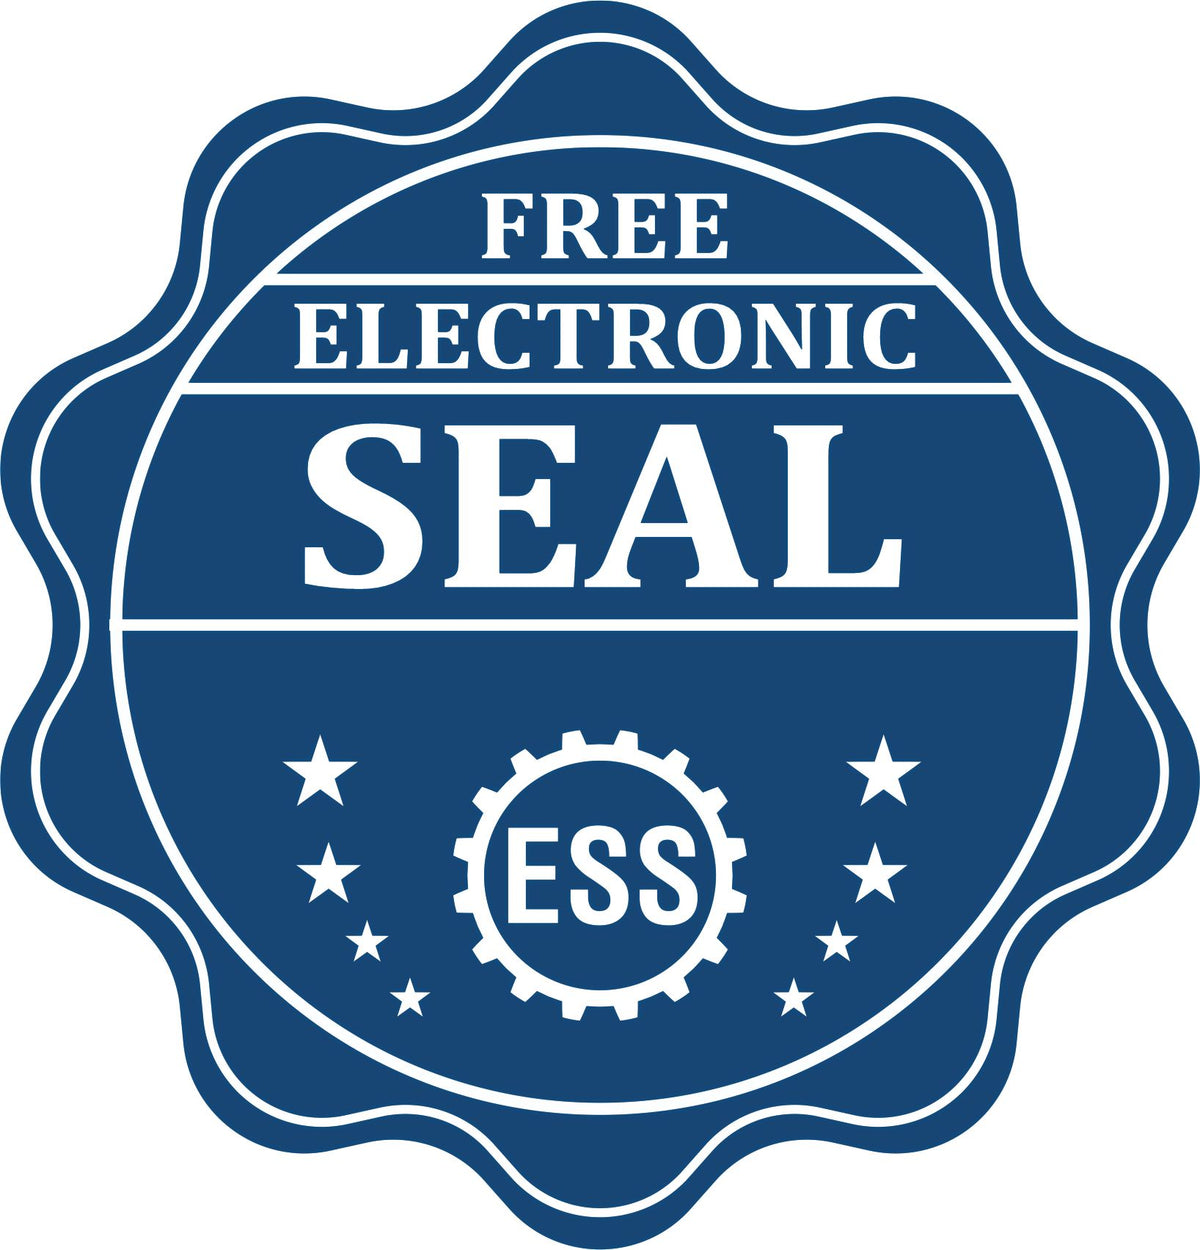 A badge showing a free electronic seal for the PSI Florida Notary Stamp with stars and the ESS gear on the emblem.